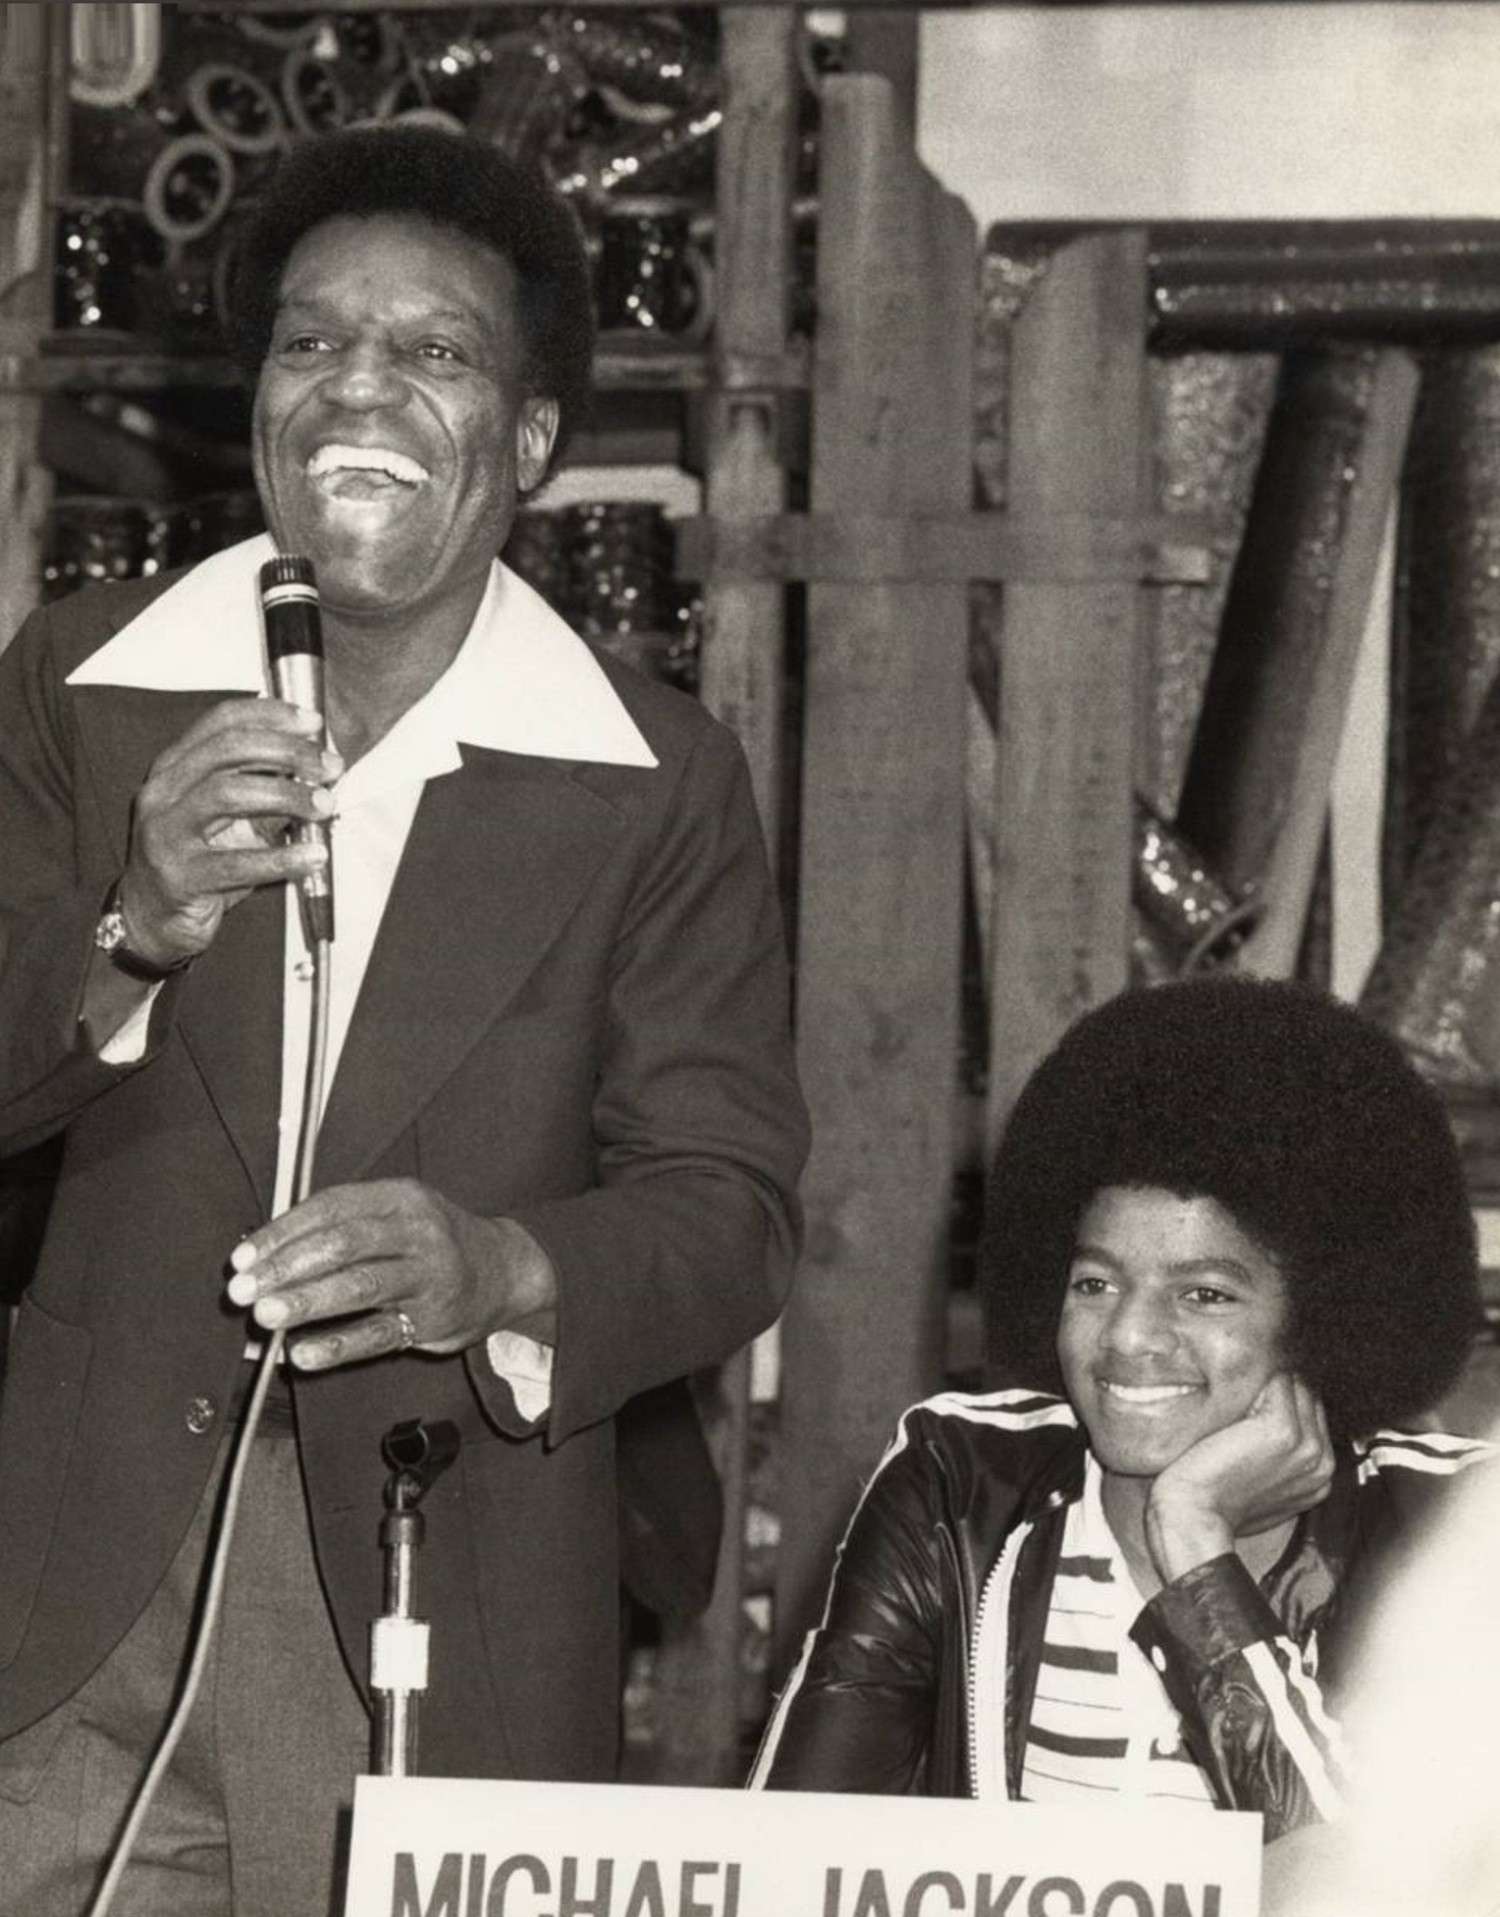 DIVULGAÇÃO - The Wiz - Michael Jackson and his The Wiz, Co-Also starring Diana Ross and Russell Nipsy attend a Press Conference for the premiere of the film. 17-28_10